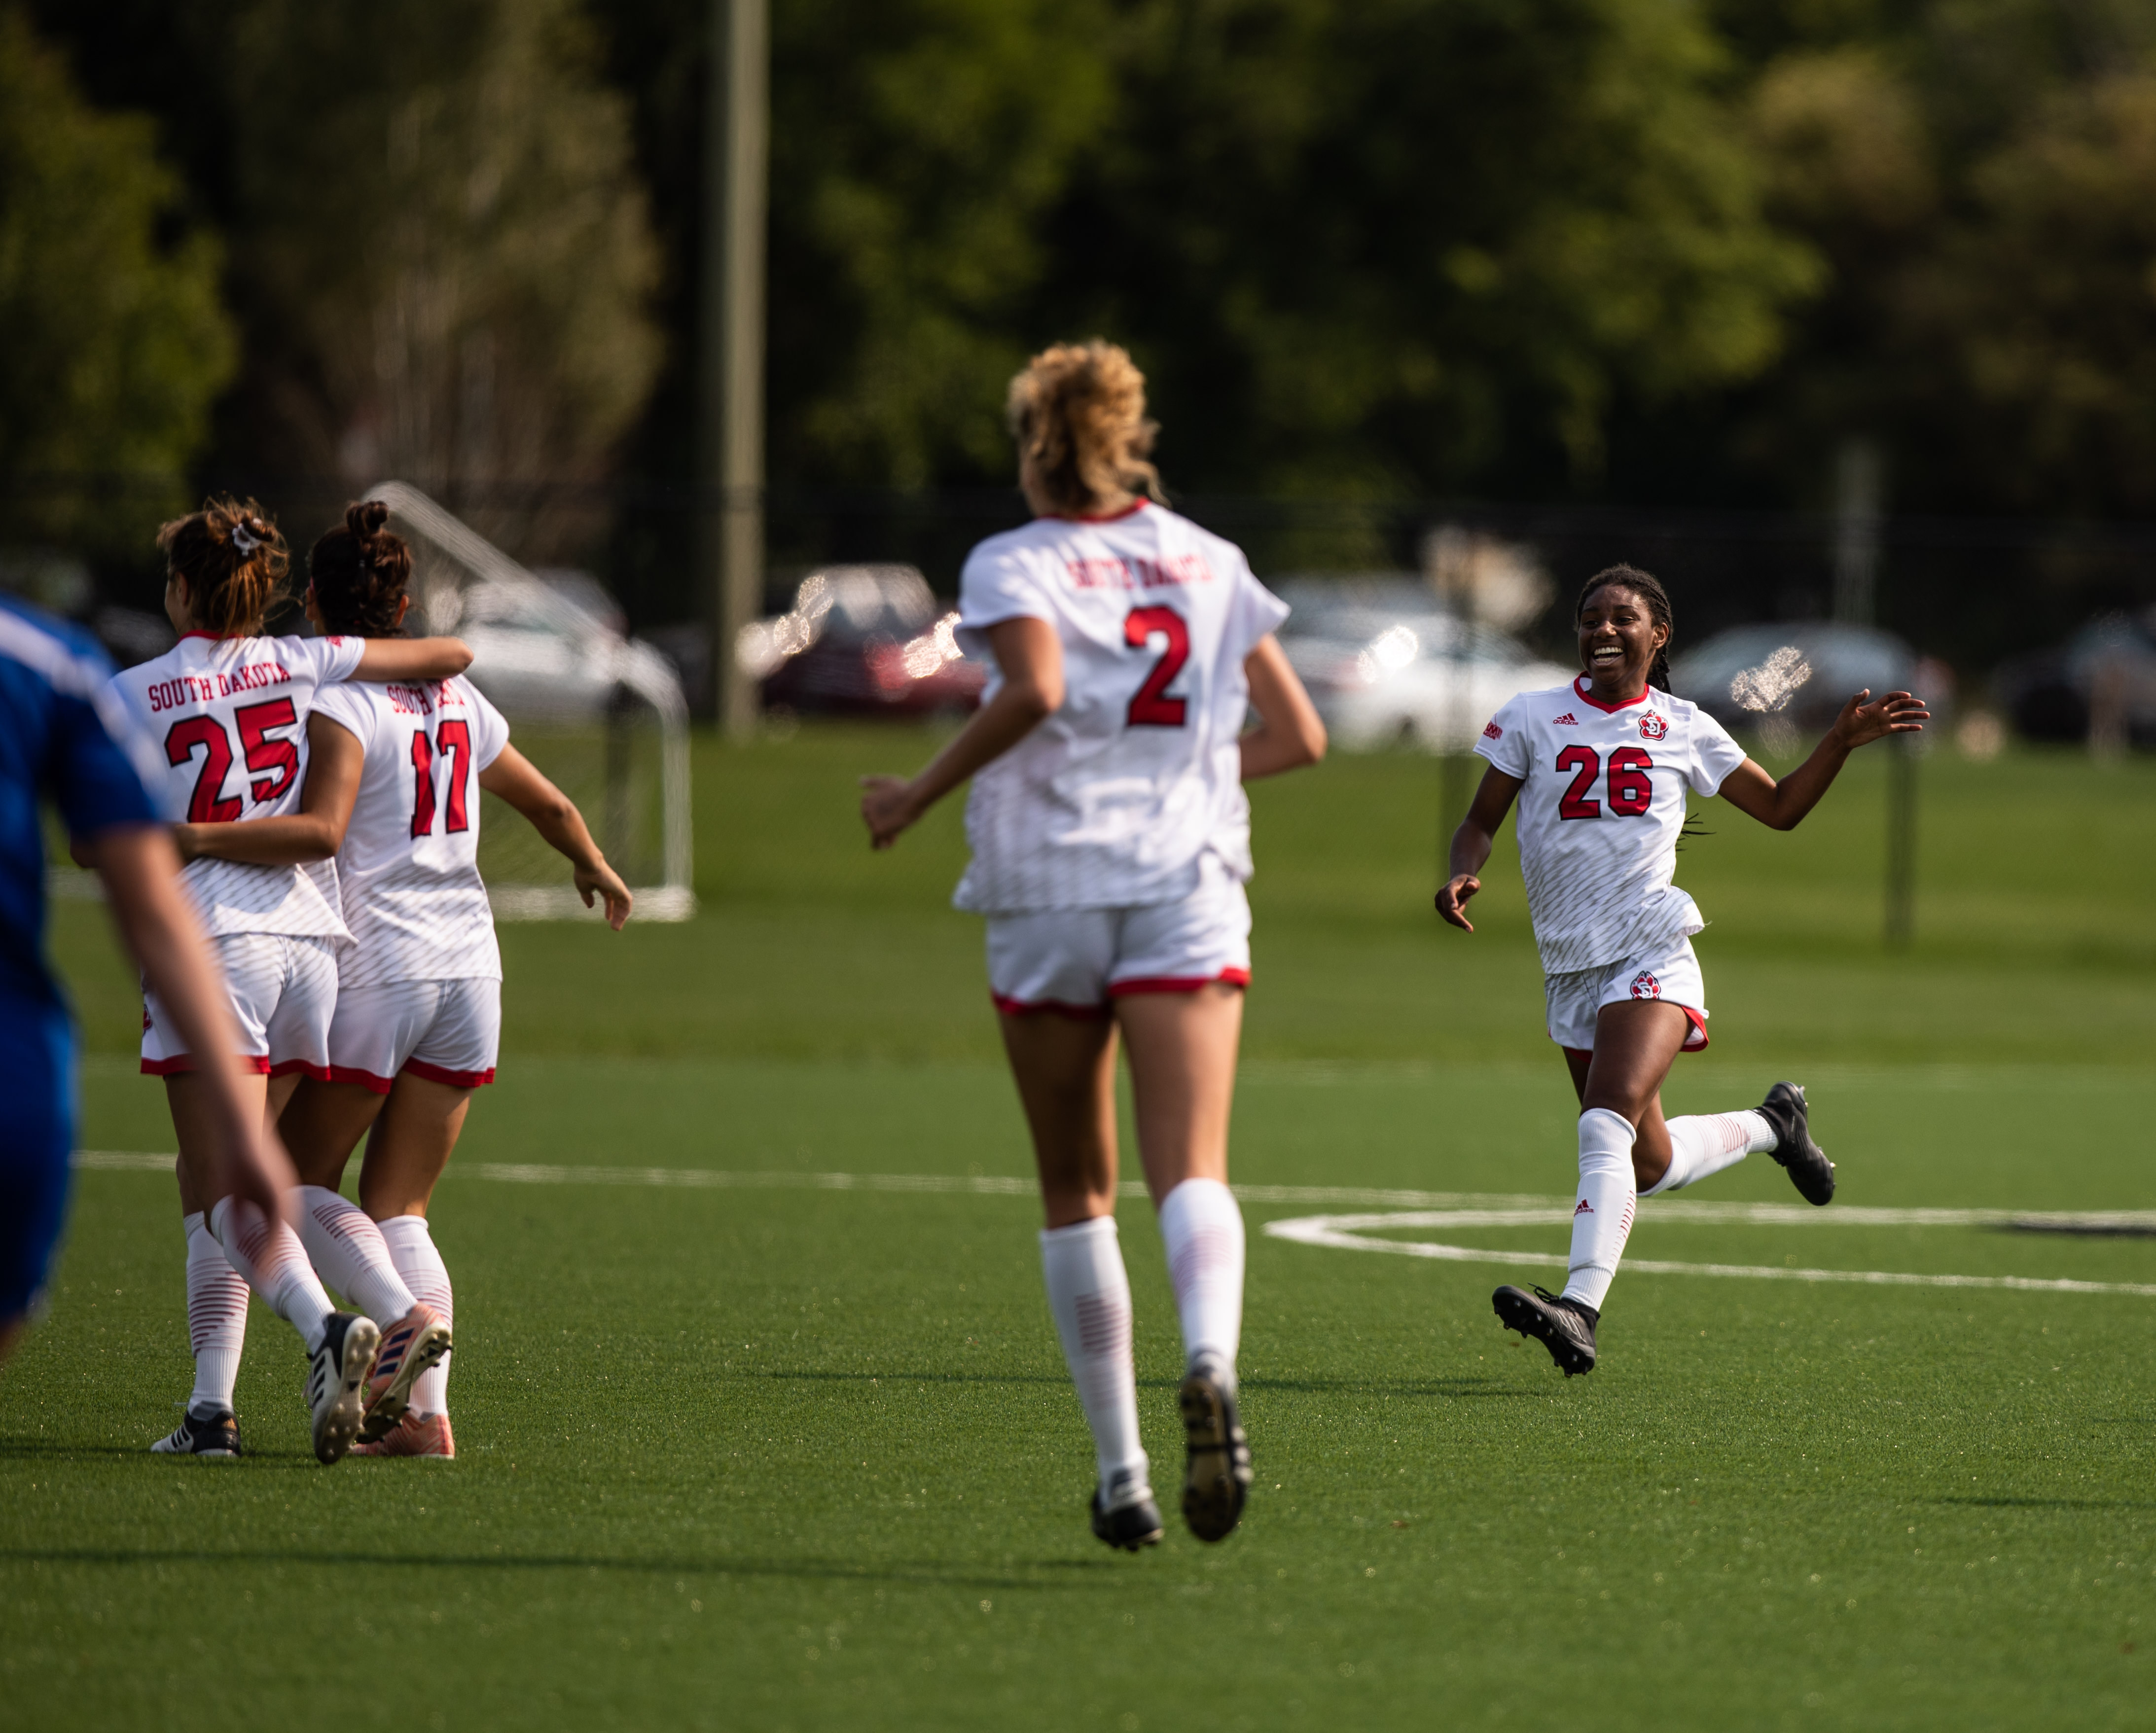 USD soccer opens three game home stand with victory